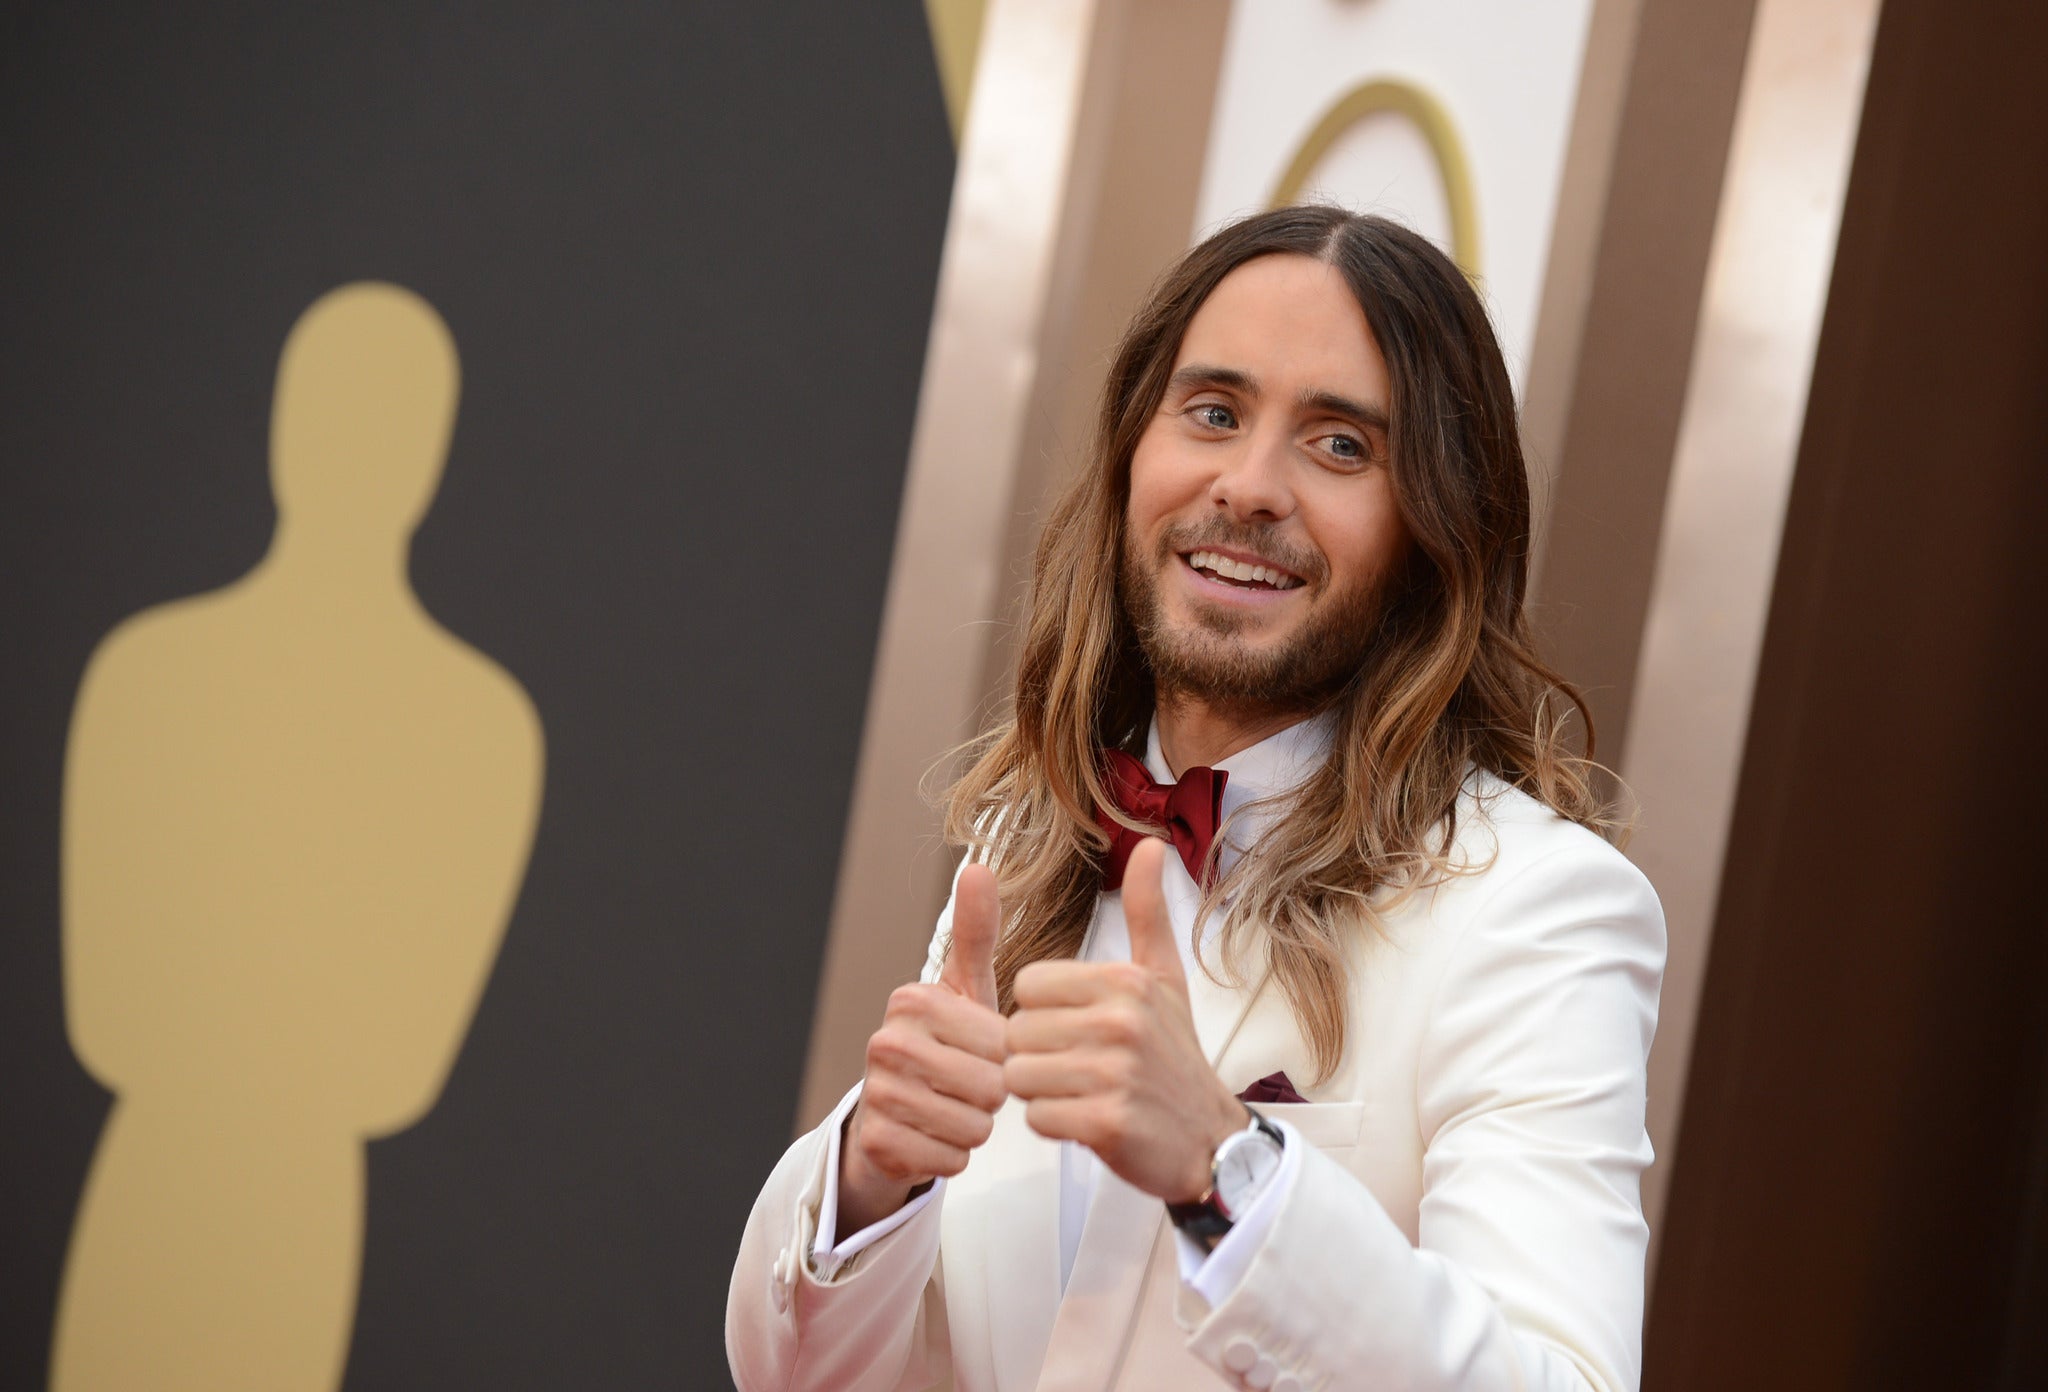 Dallas Buyers Club's Jared Leto gives a double thumbs up on the red carpet